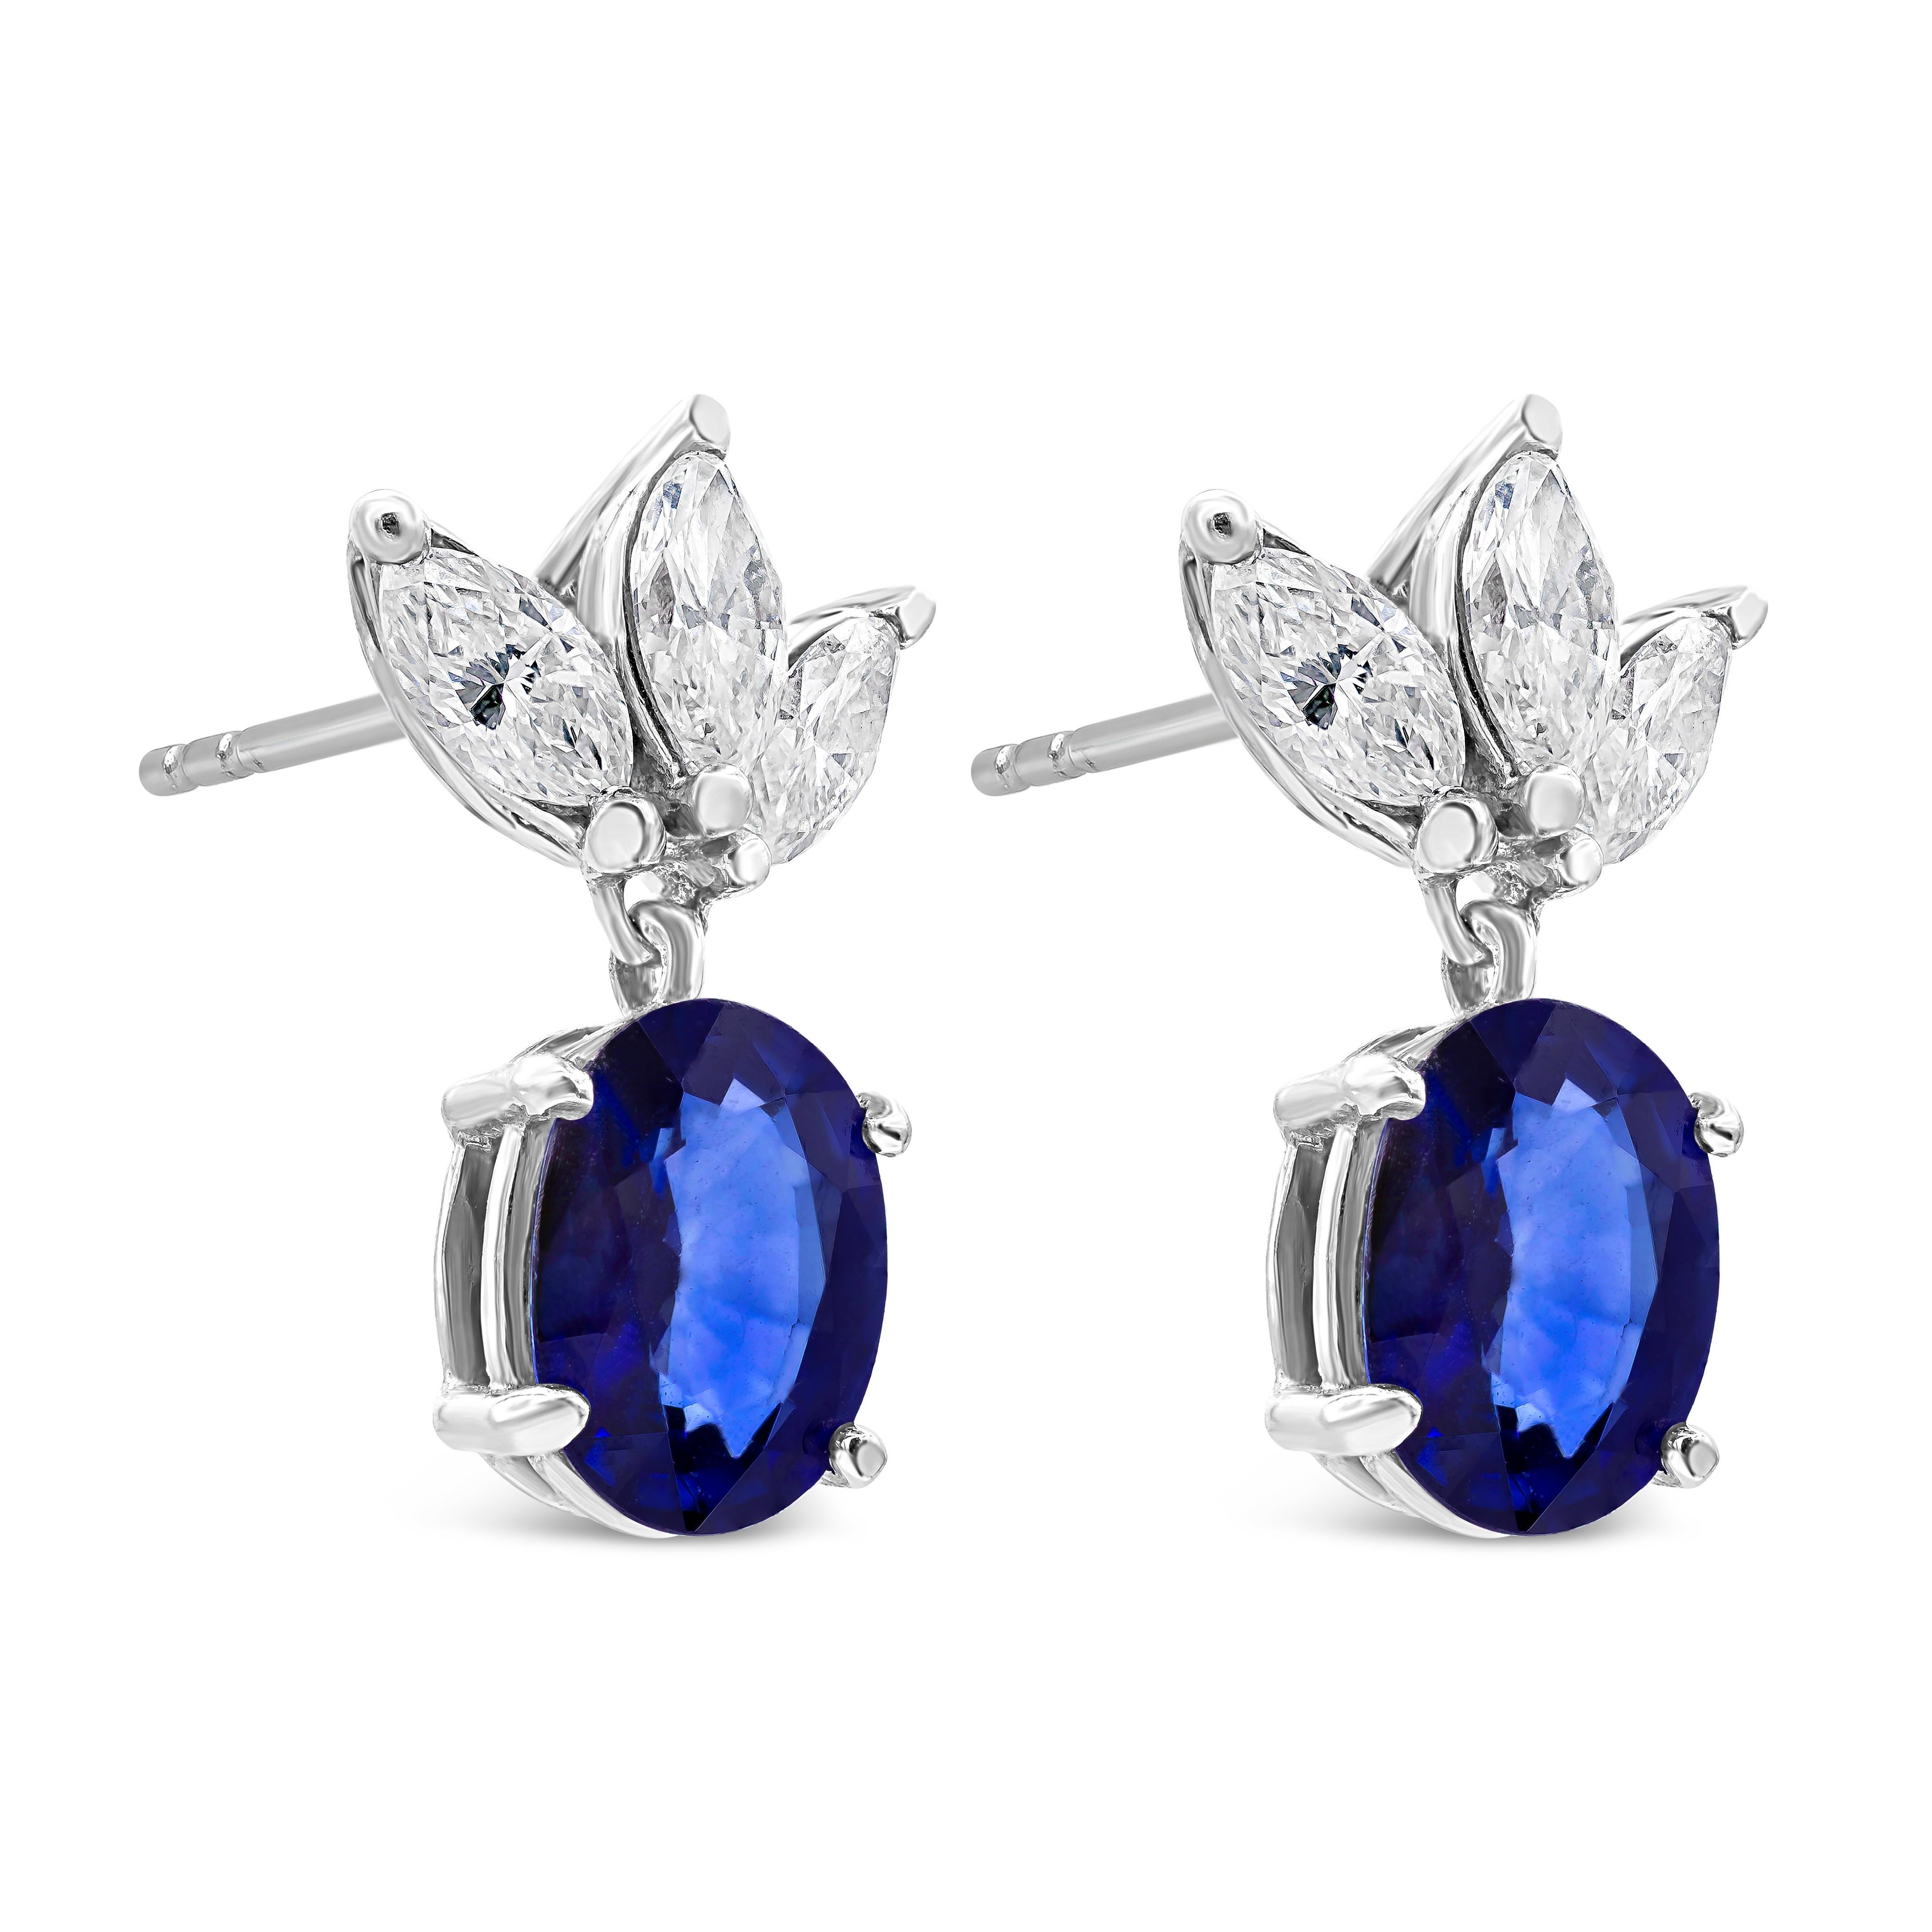 Contemporary 4.21 Carats Total Oval Cut Blue Sapphire & Diamond Dangle Earrings For Sale